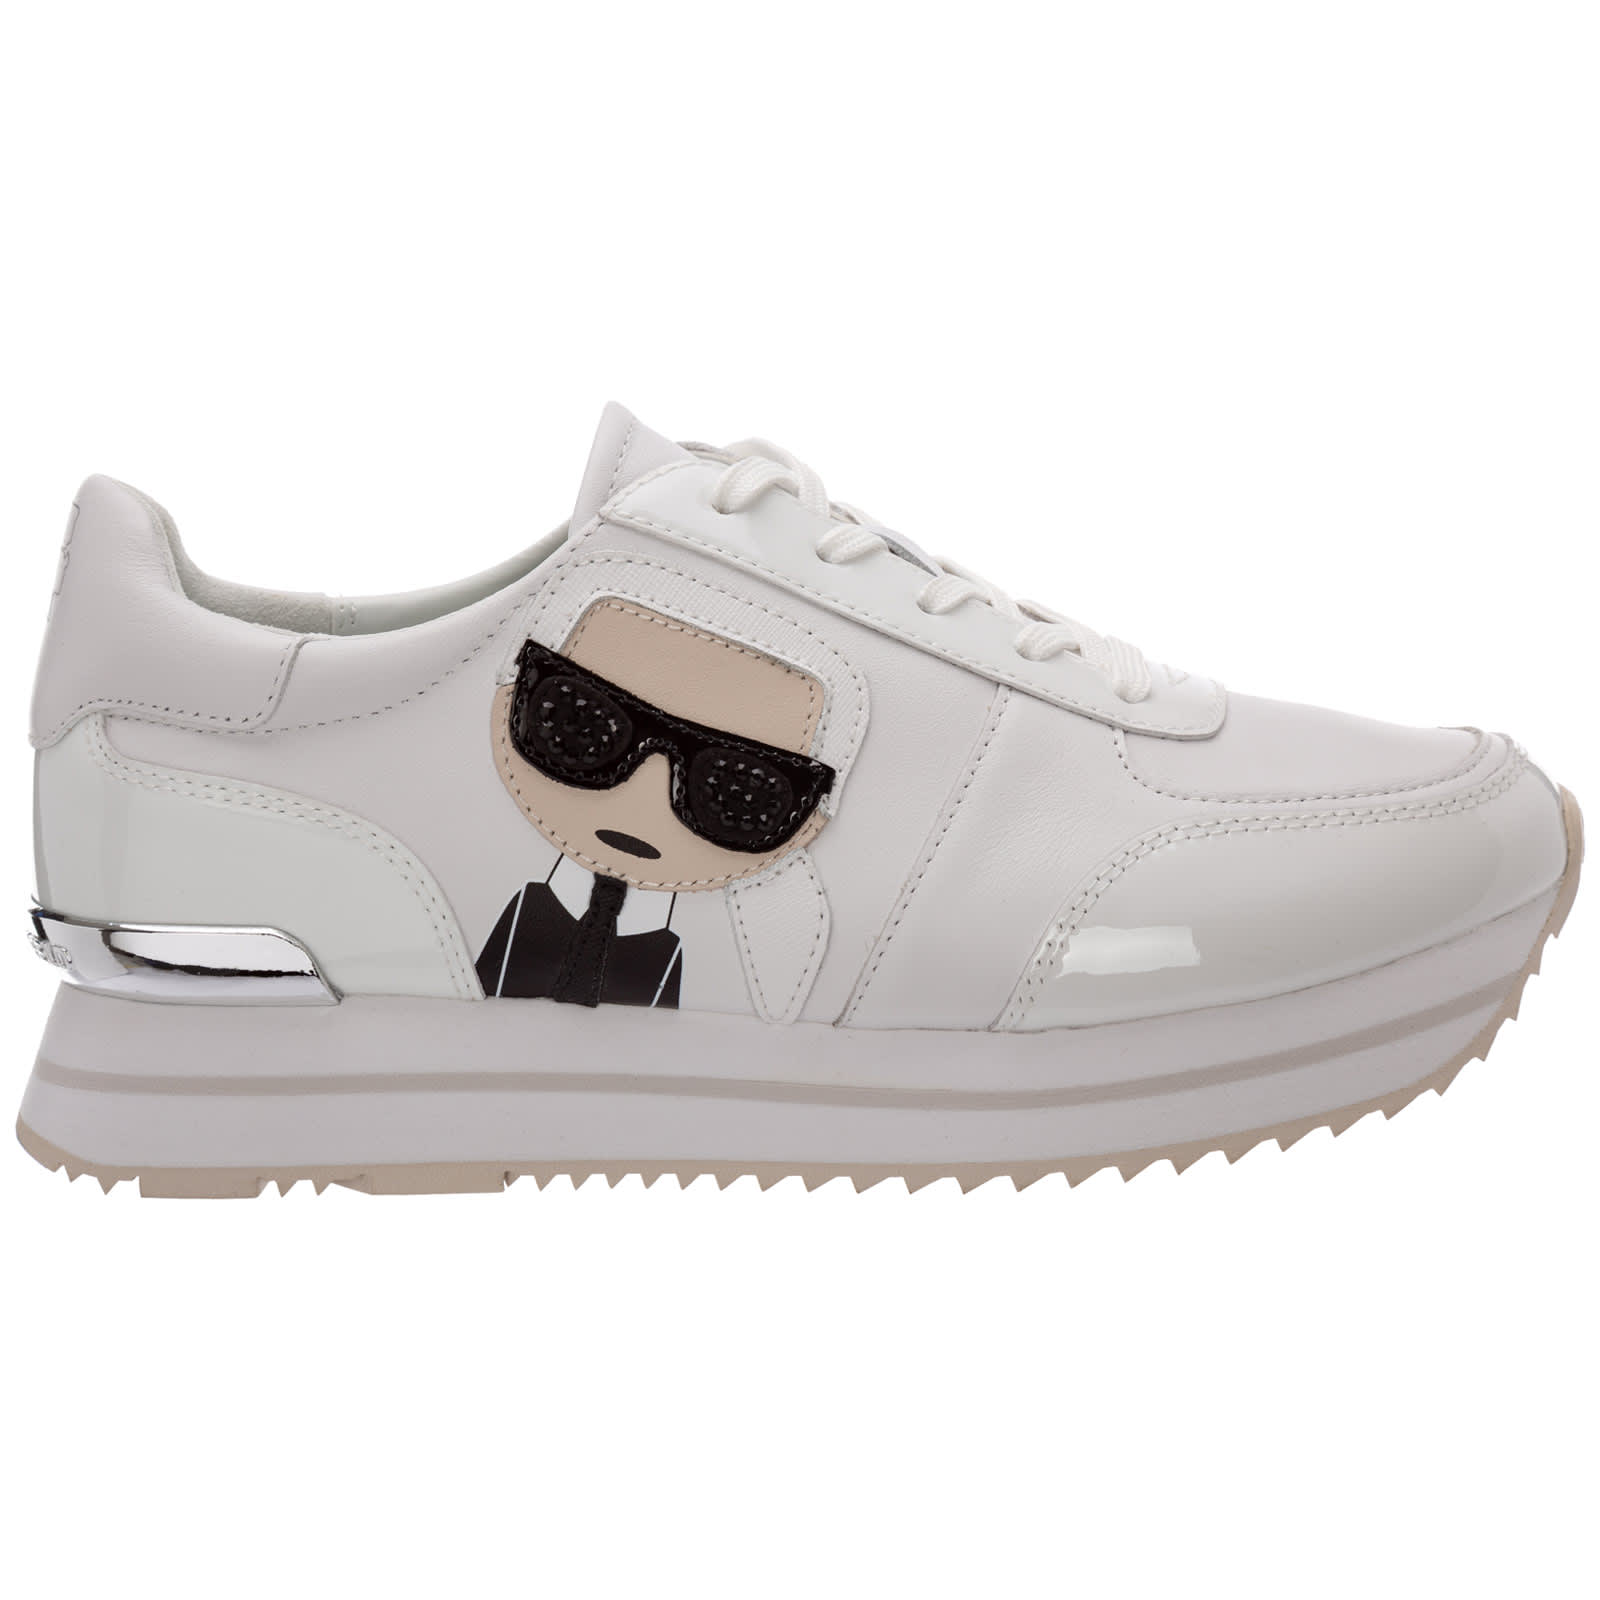 Buy Karl Lagerfeld K/ikonic Velocit? Sneakers online, shop Karl Lagerfeld shoes with free shipping